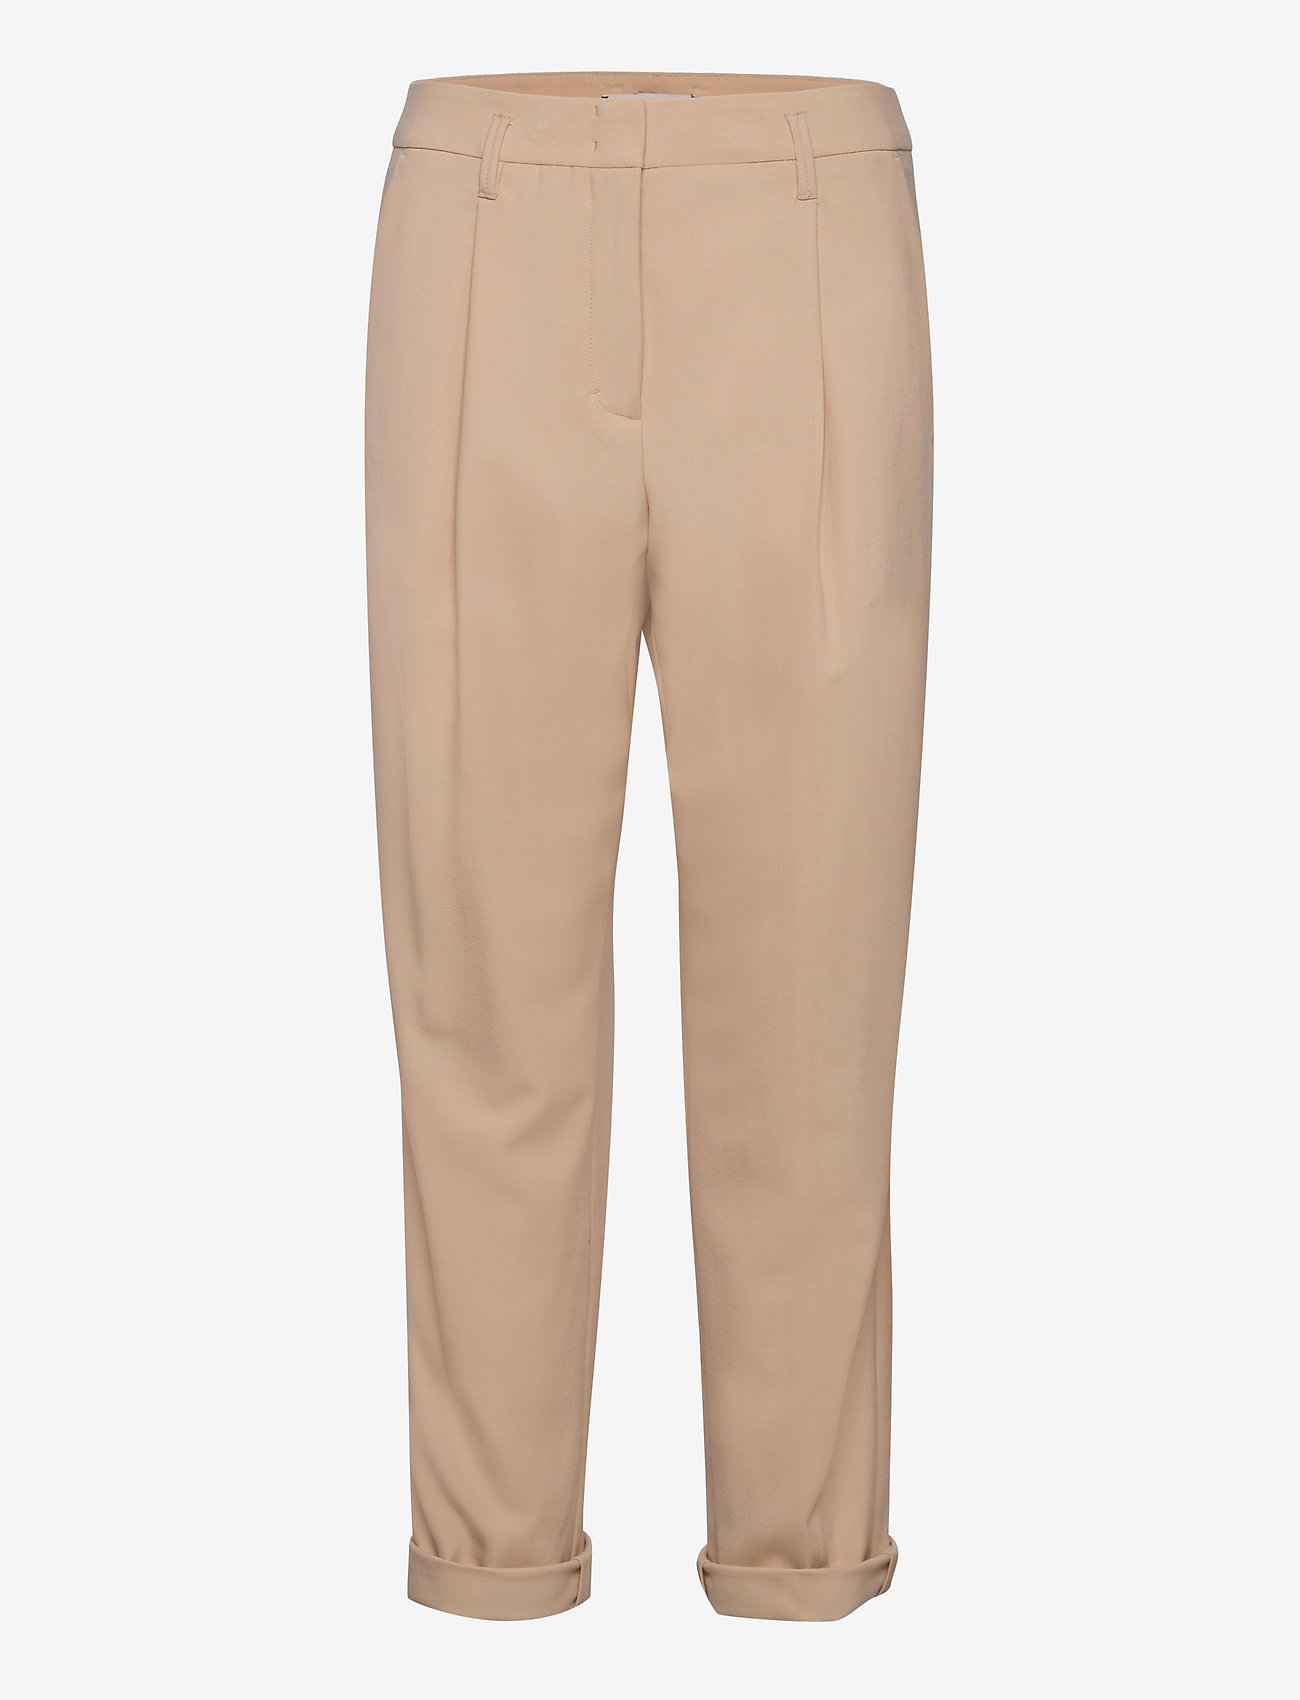 Dorothee Schumacher - THE NEW AMBITION pants - formell - apricot beige - 0